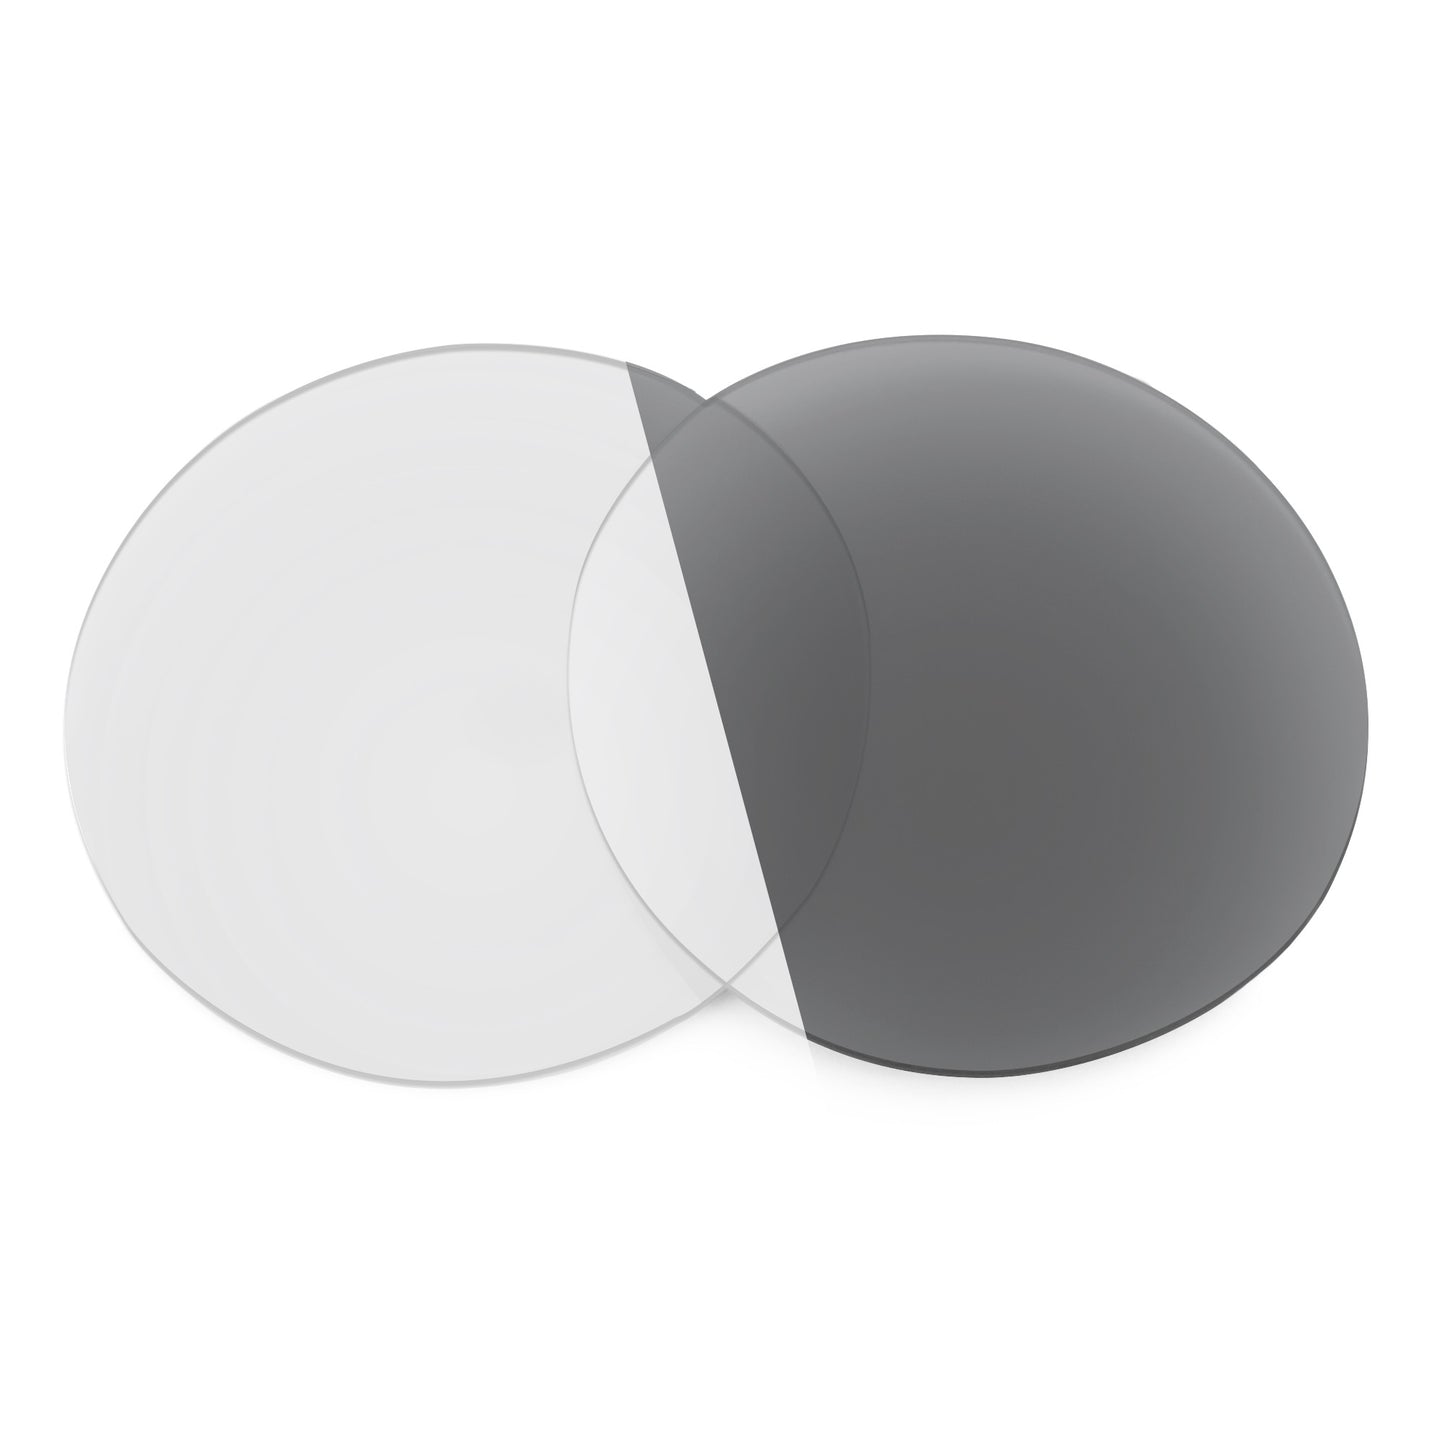 Revant replacement lenses for Ray-Ban Round Folding RB3517 48mm Non-Polarized Adapt Gray Photochromic